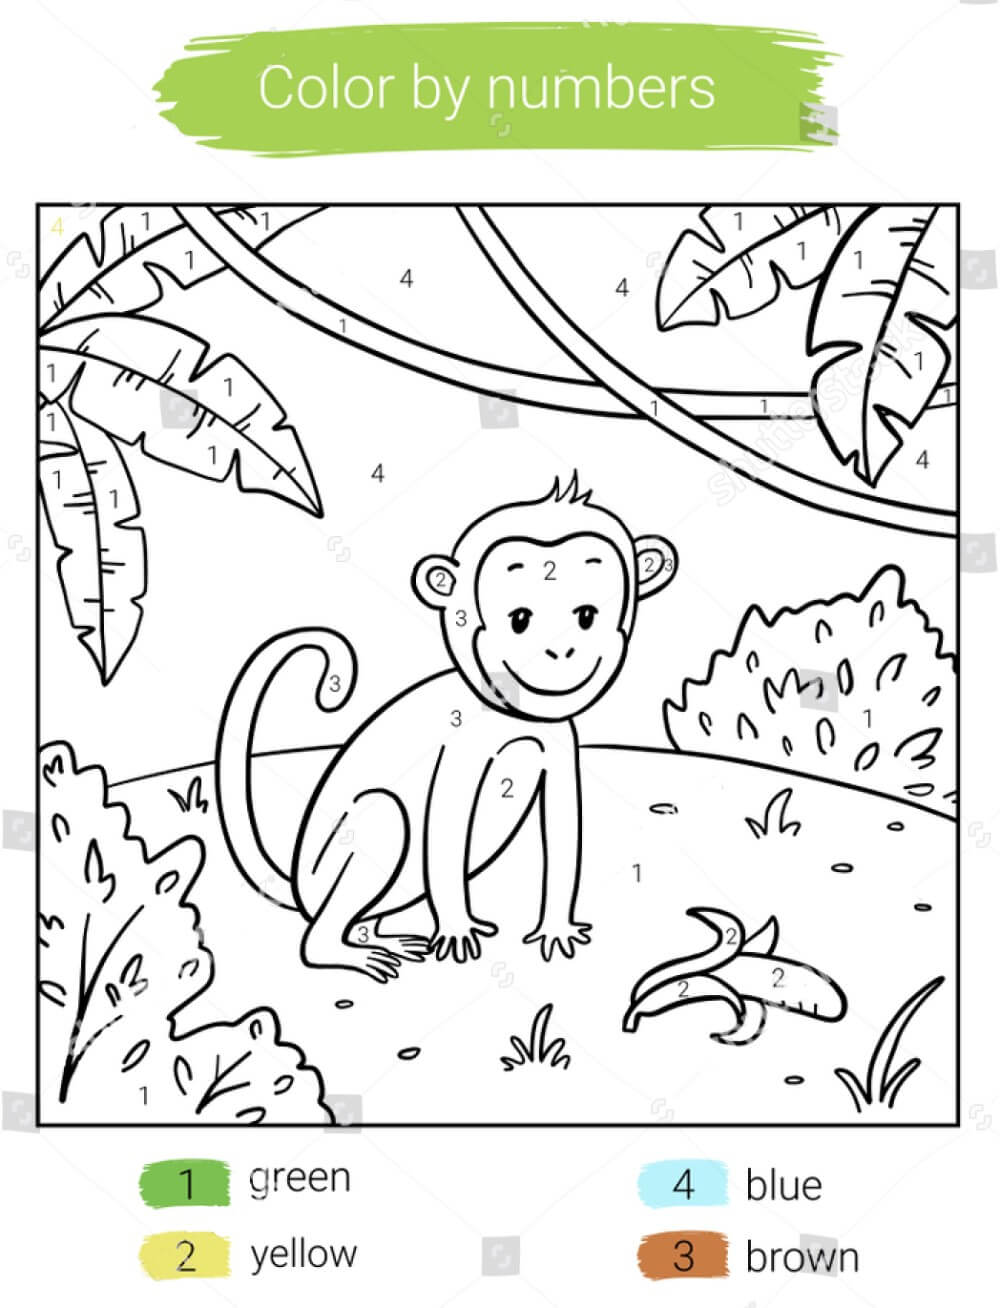 Monkey and banana color by number